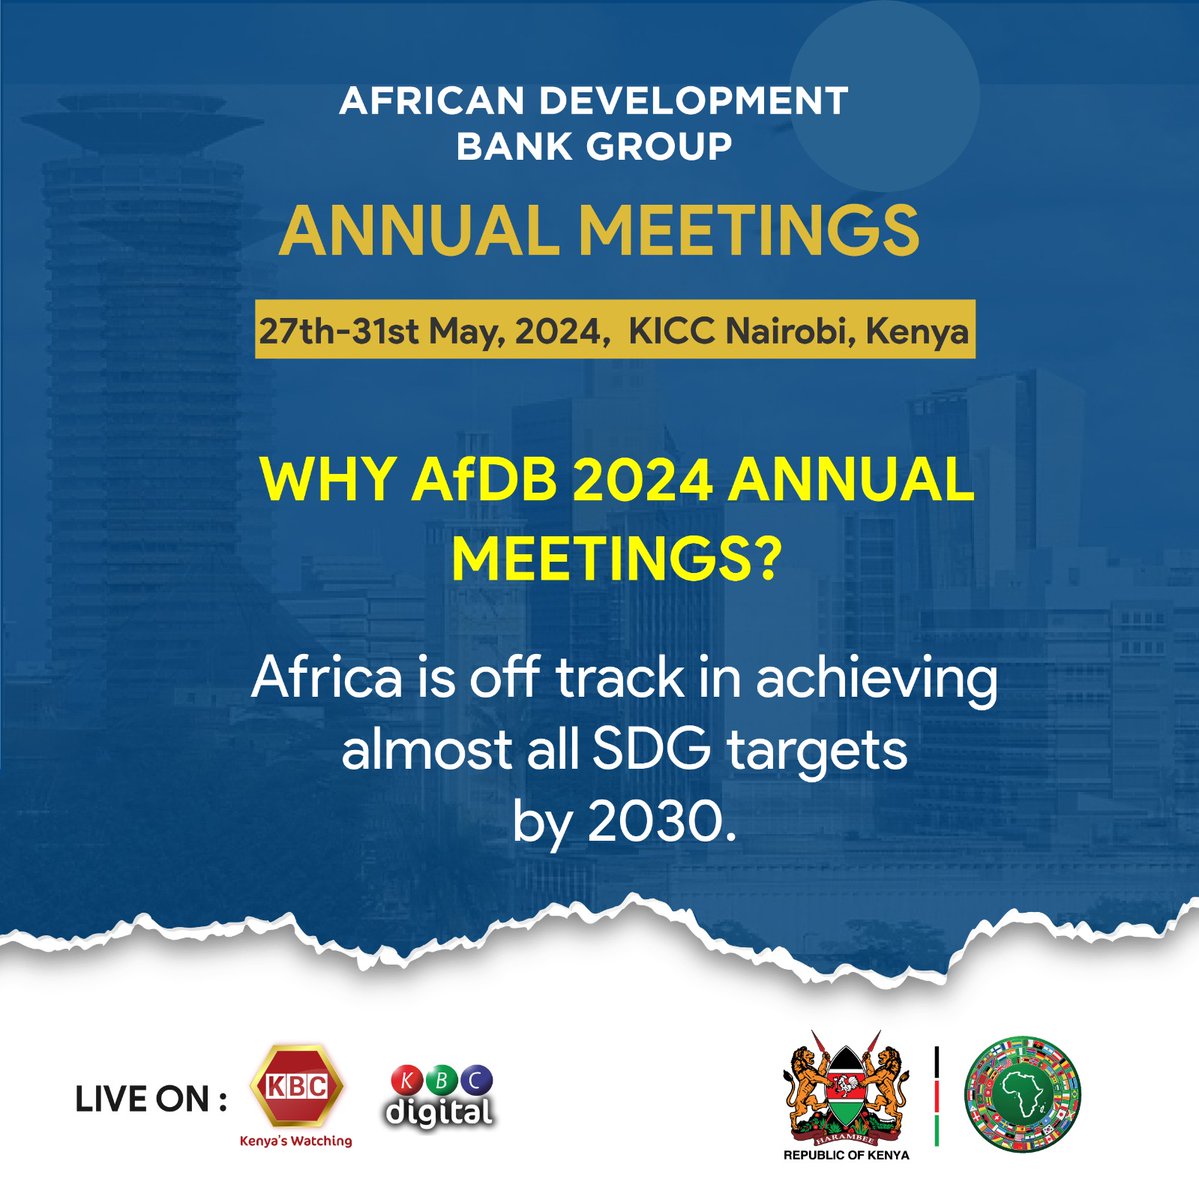 WHY AfDB 2024 ANNUAL MEETINGS? Africa is off track in achieving almost all SDG targets by 2030. Join us to explore solutions and drive Africa's future forward. #KBCniYetu. #AfDBAM2024